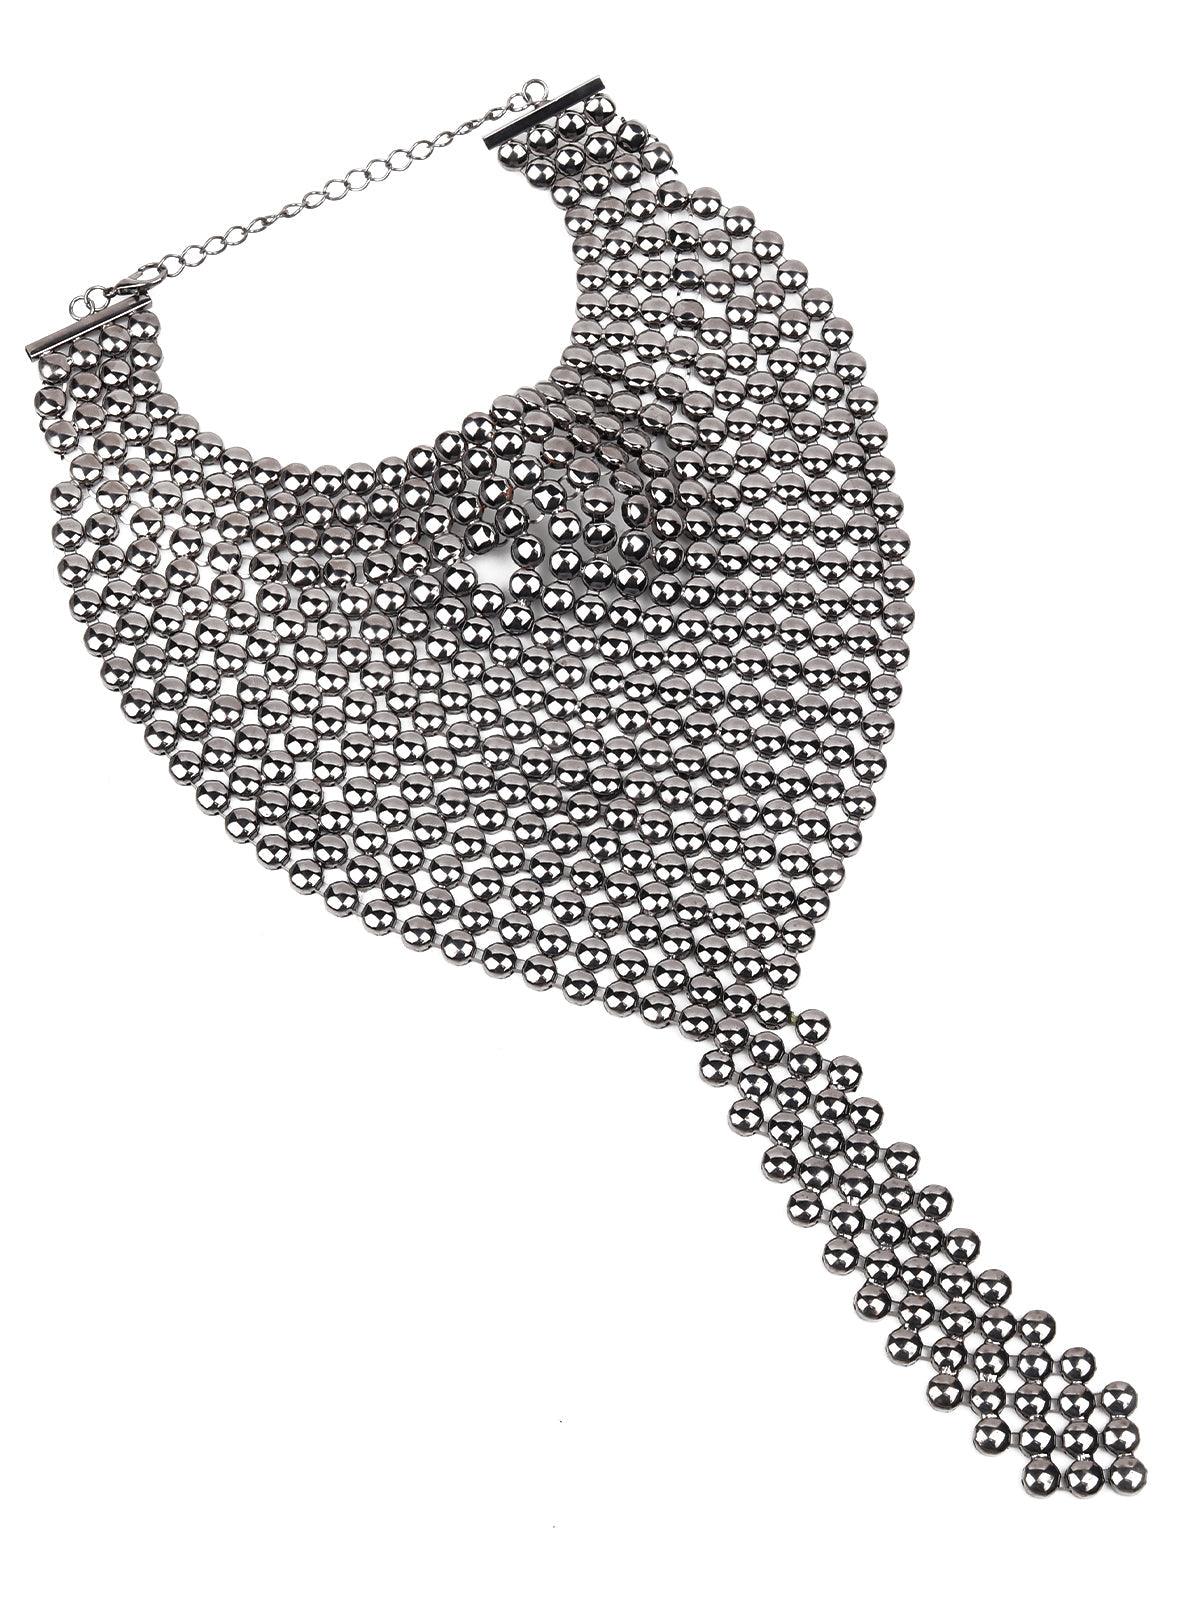 Women's Stunning Glossy Deep Silver Body Chain Necklace - Odette